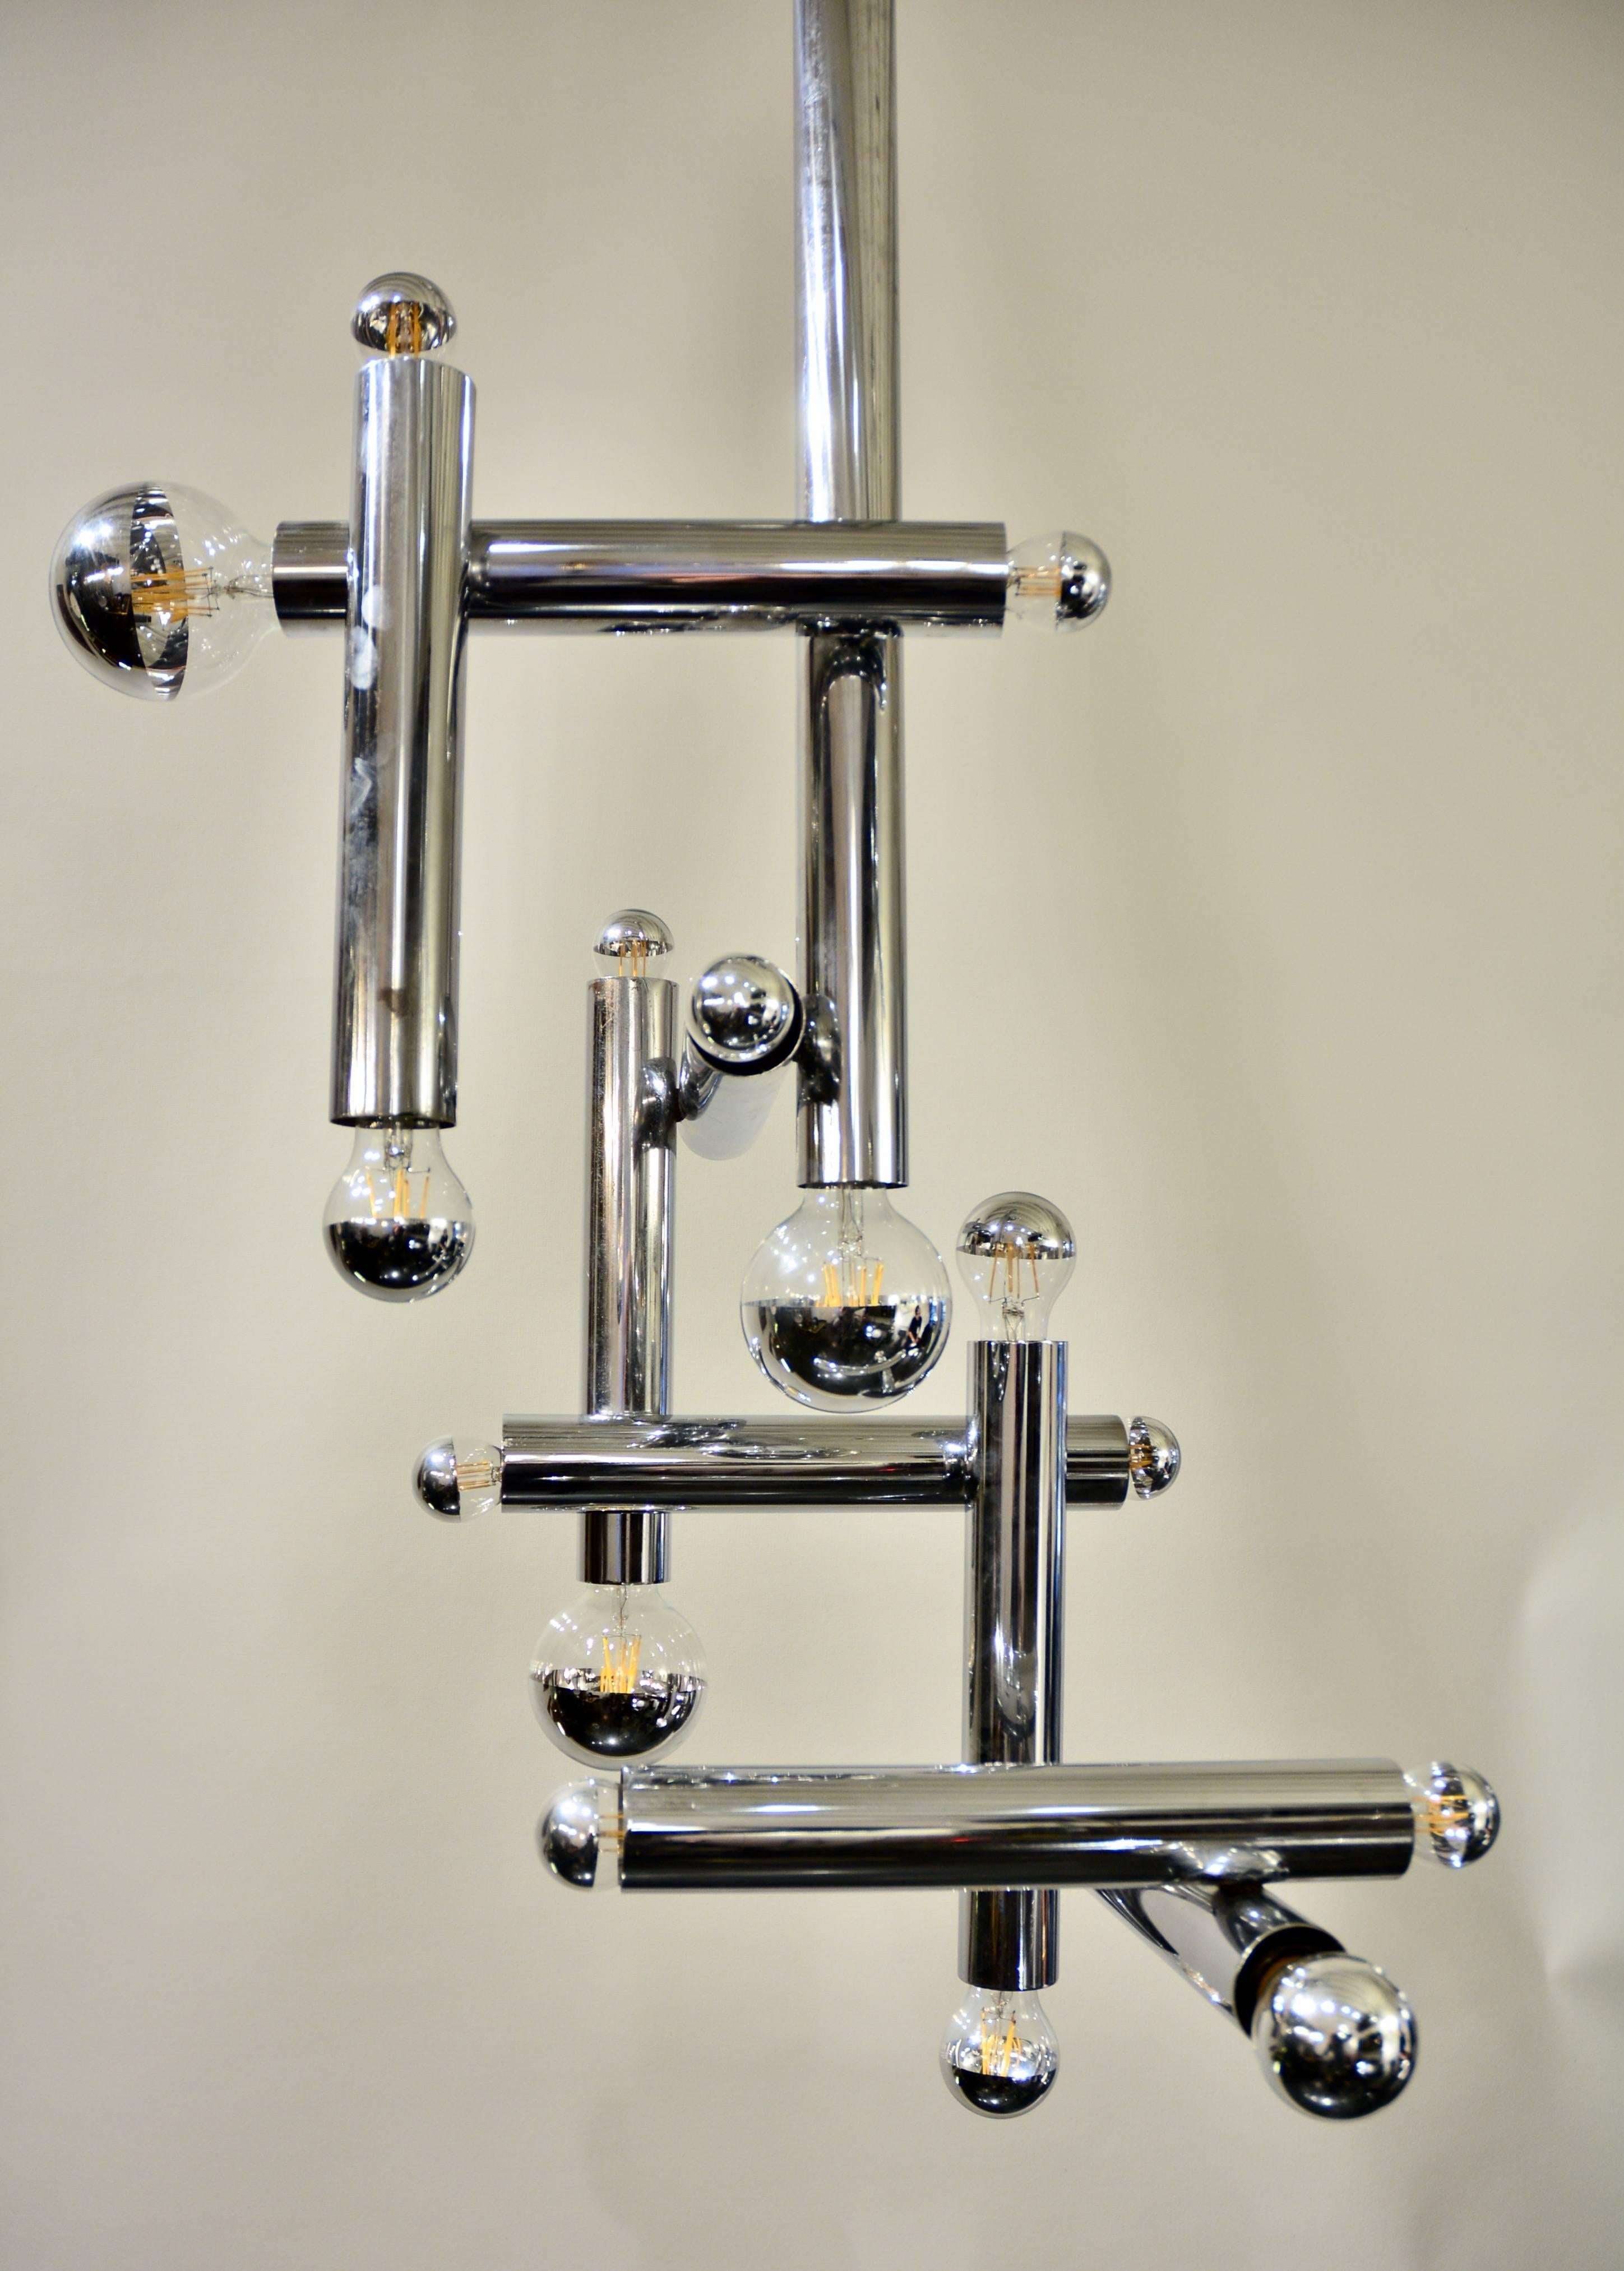 Amazing chandelier by the Italian brand Stilux from the 1970s.
14 lights in total
Total height: 115cm
Total width: 40cm.